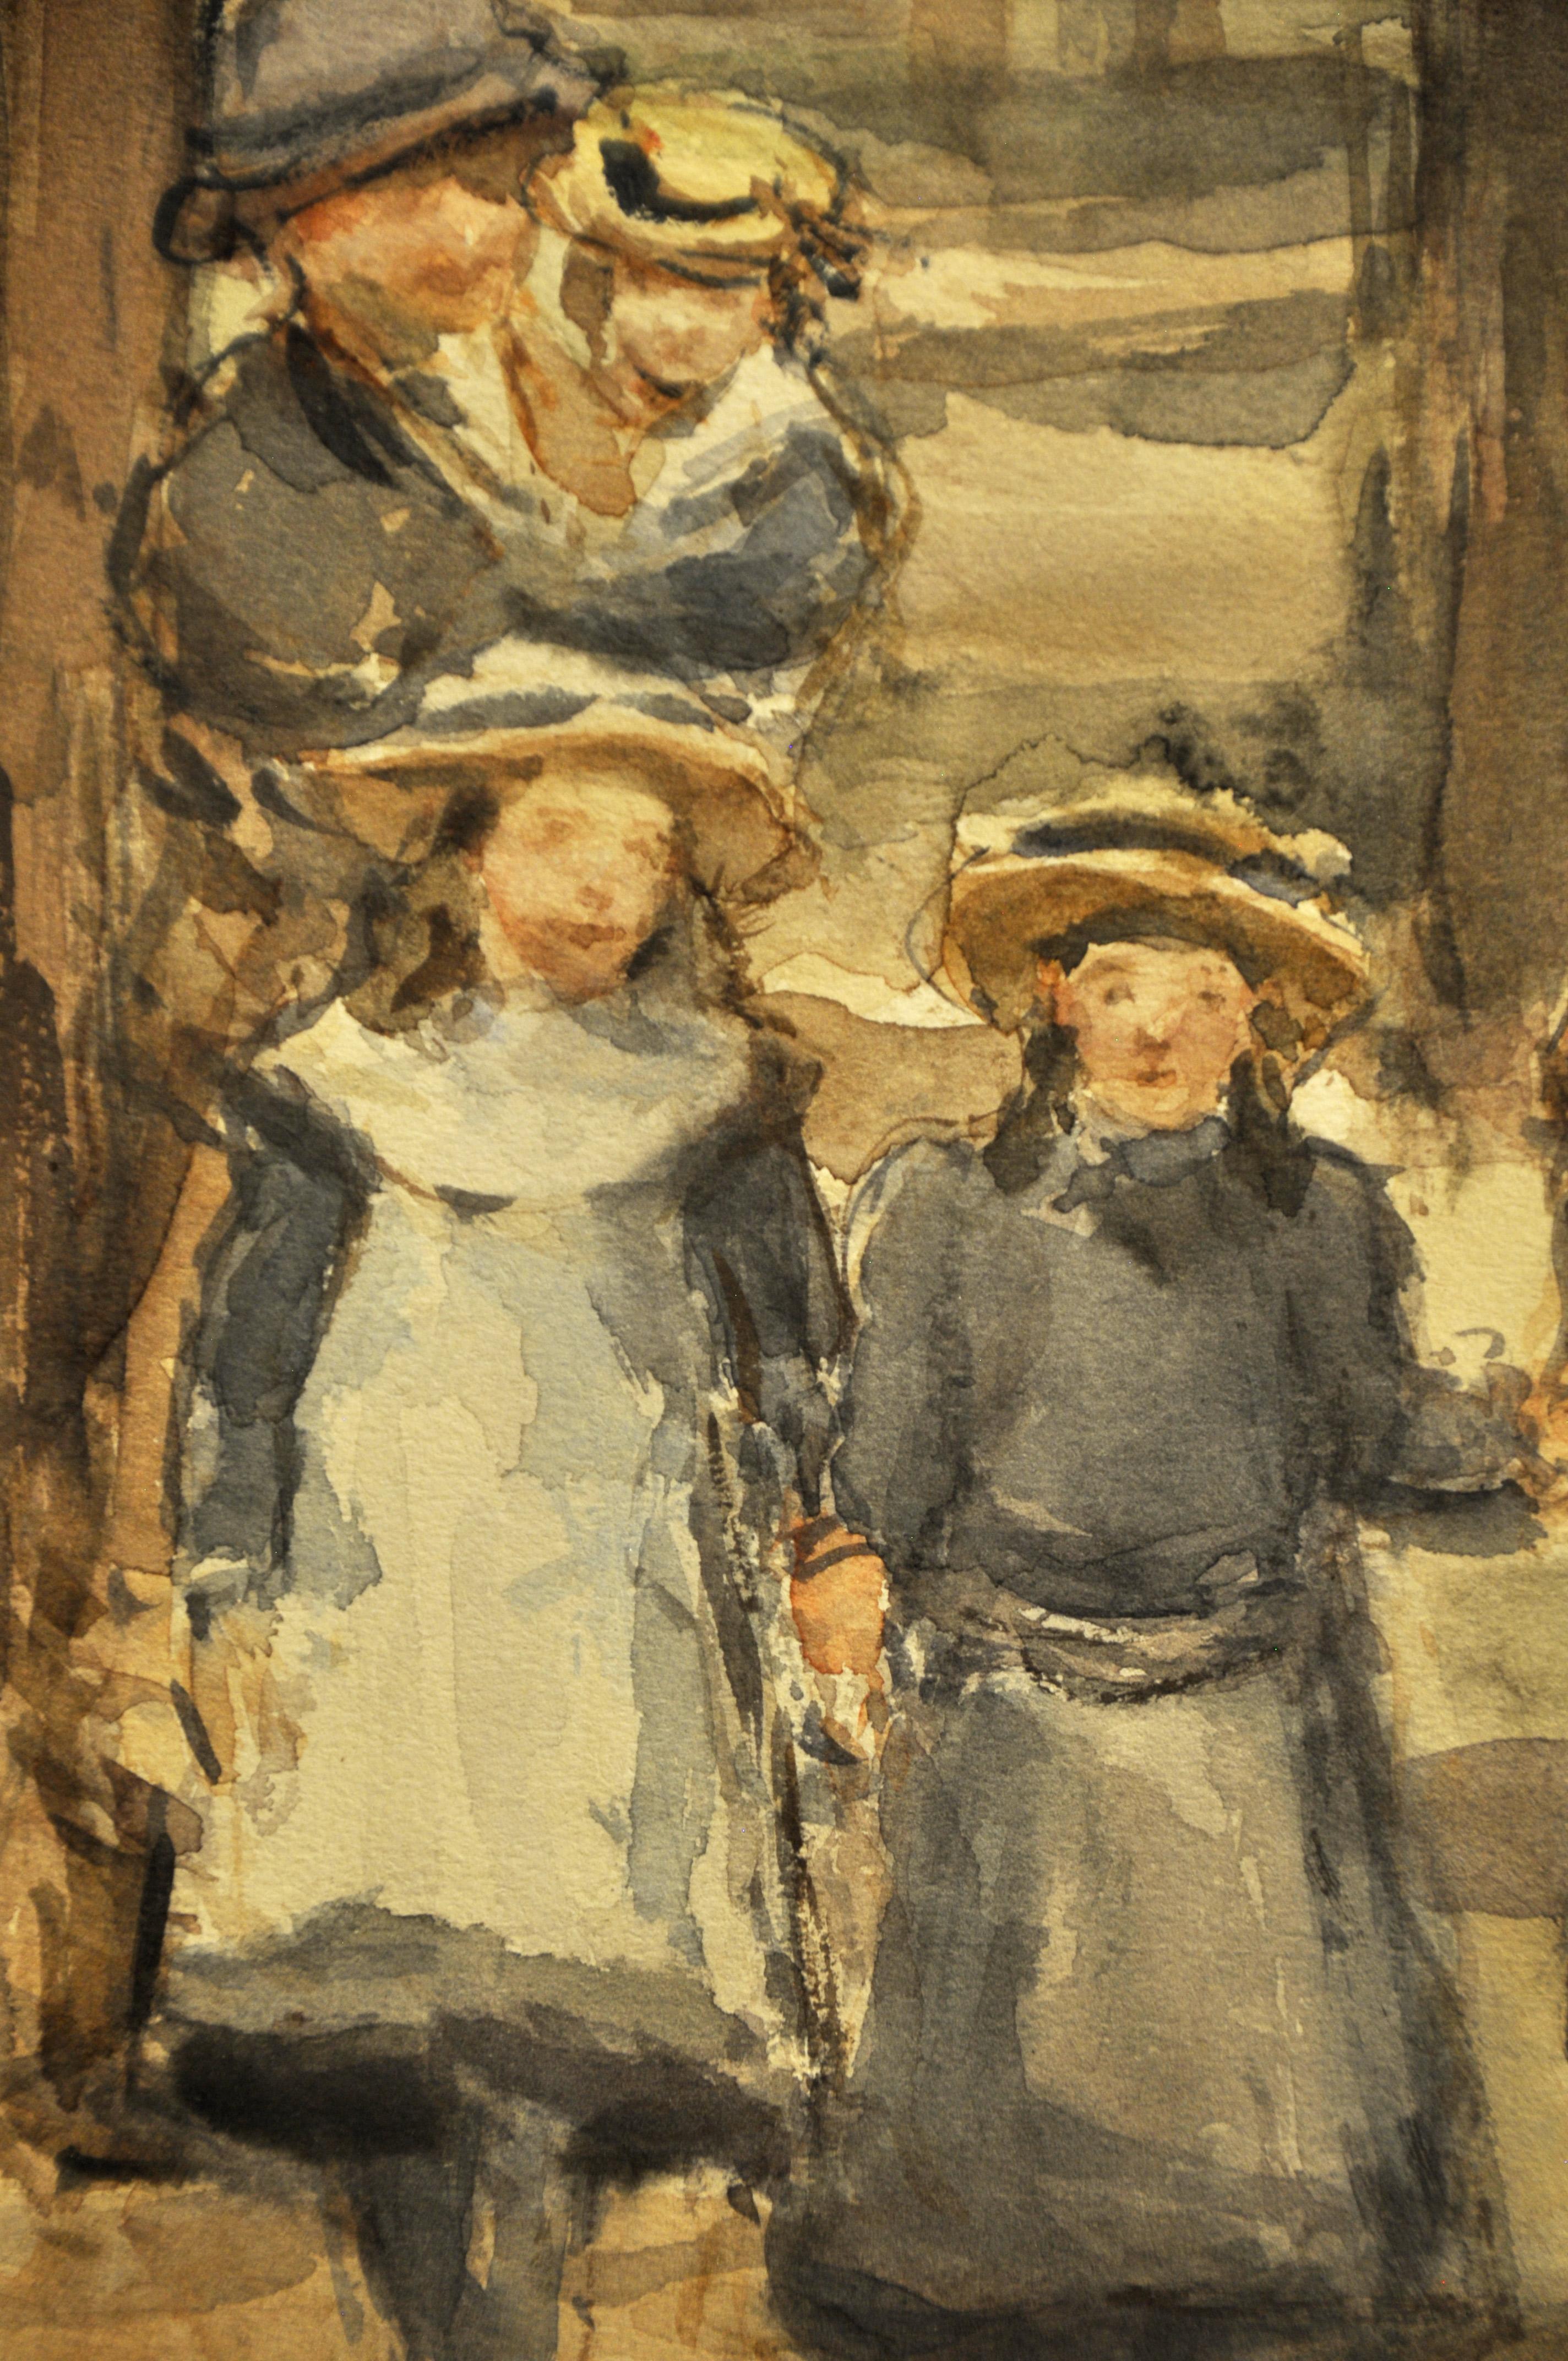 Hand-Painted Unique 19th Century Watercolor Painting (36 x 27 cm) by Dutch Painter I. Israëls For Sale